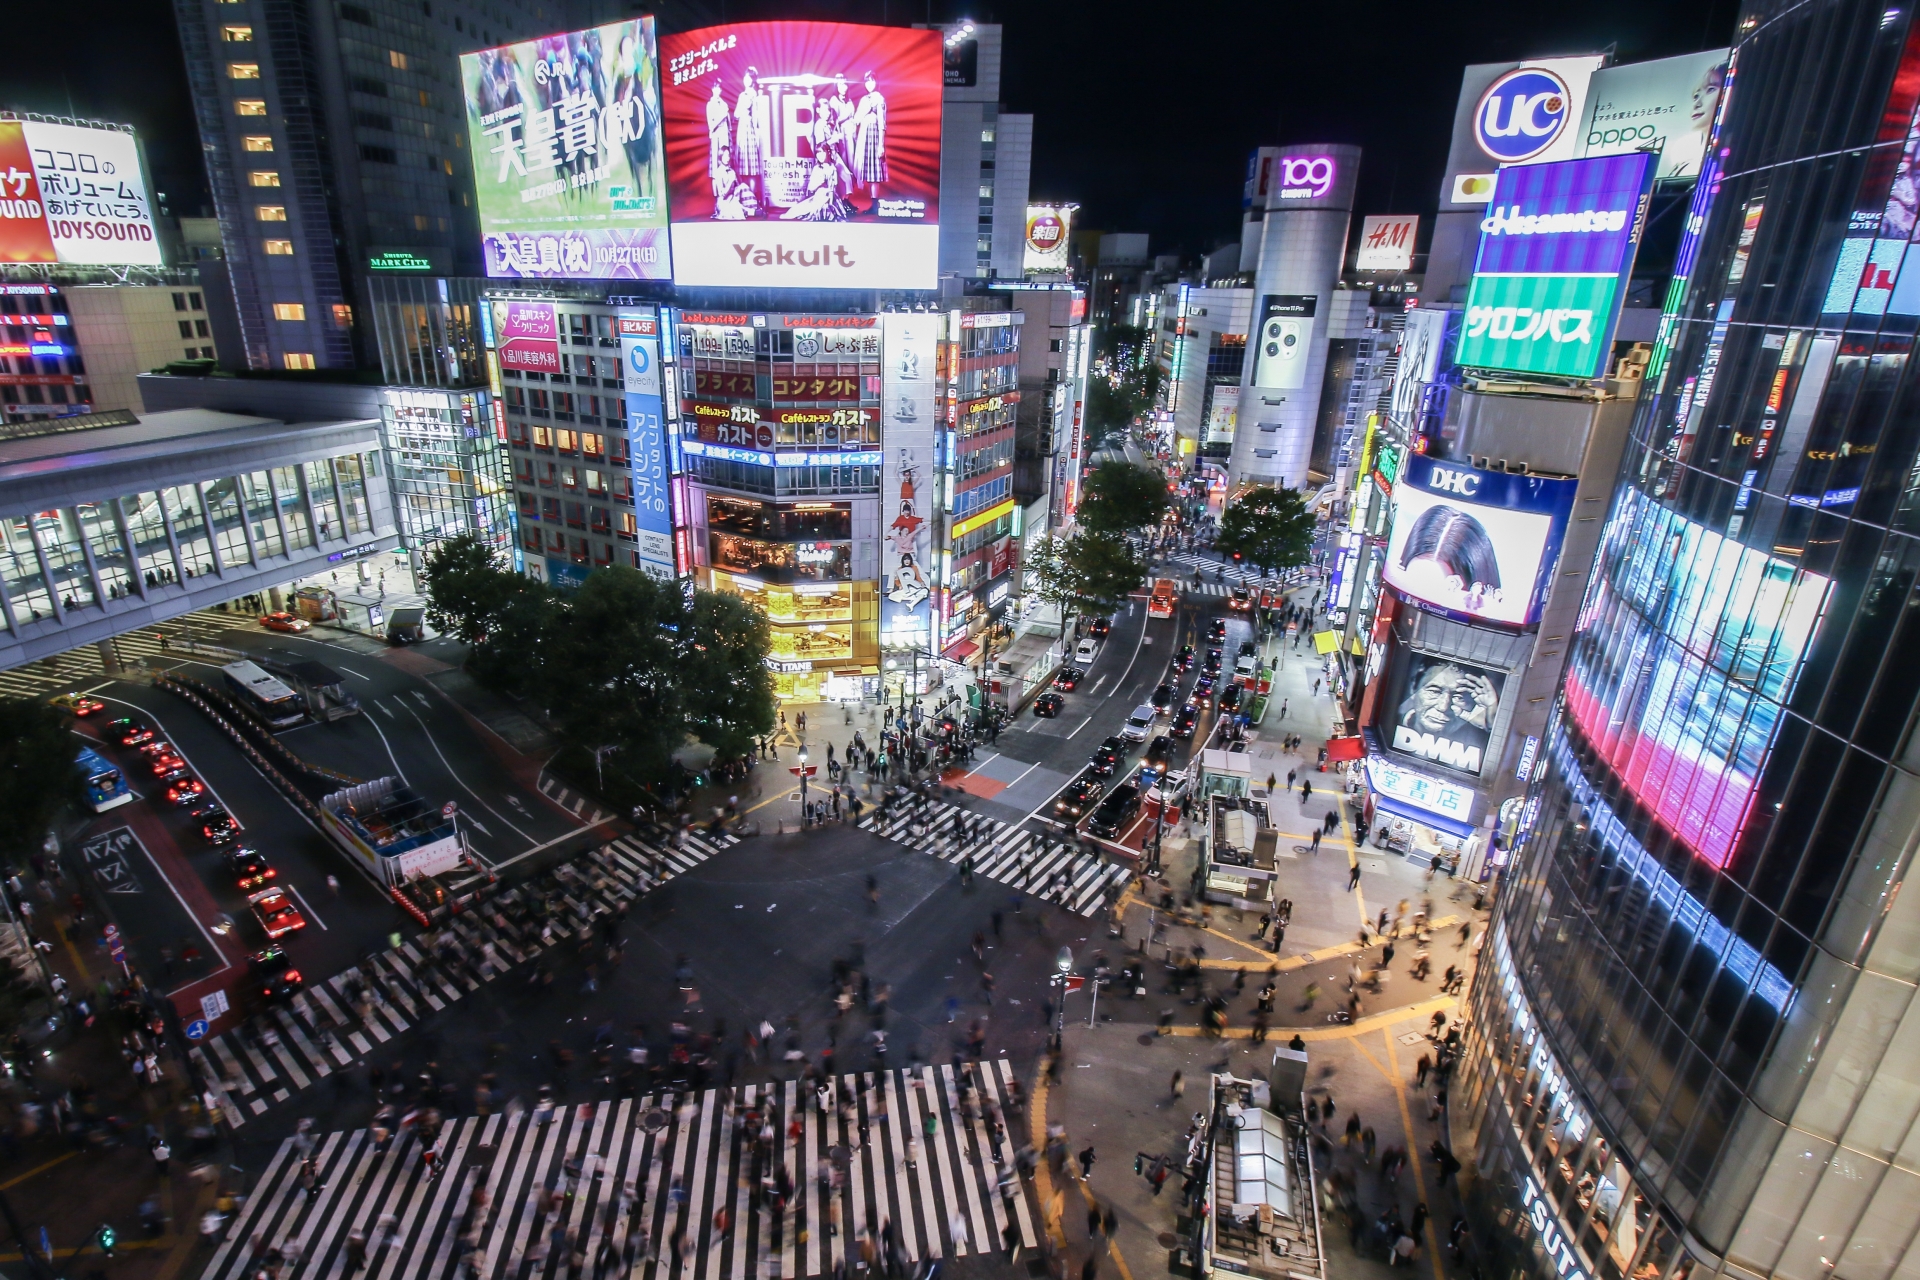 The cross section in Shibuya, Tokyo at night, which is very popular especially among people coming from overseas